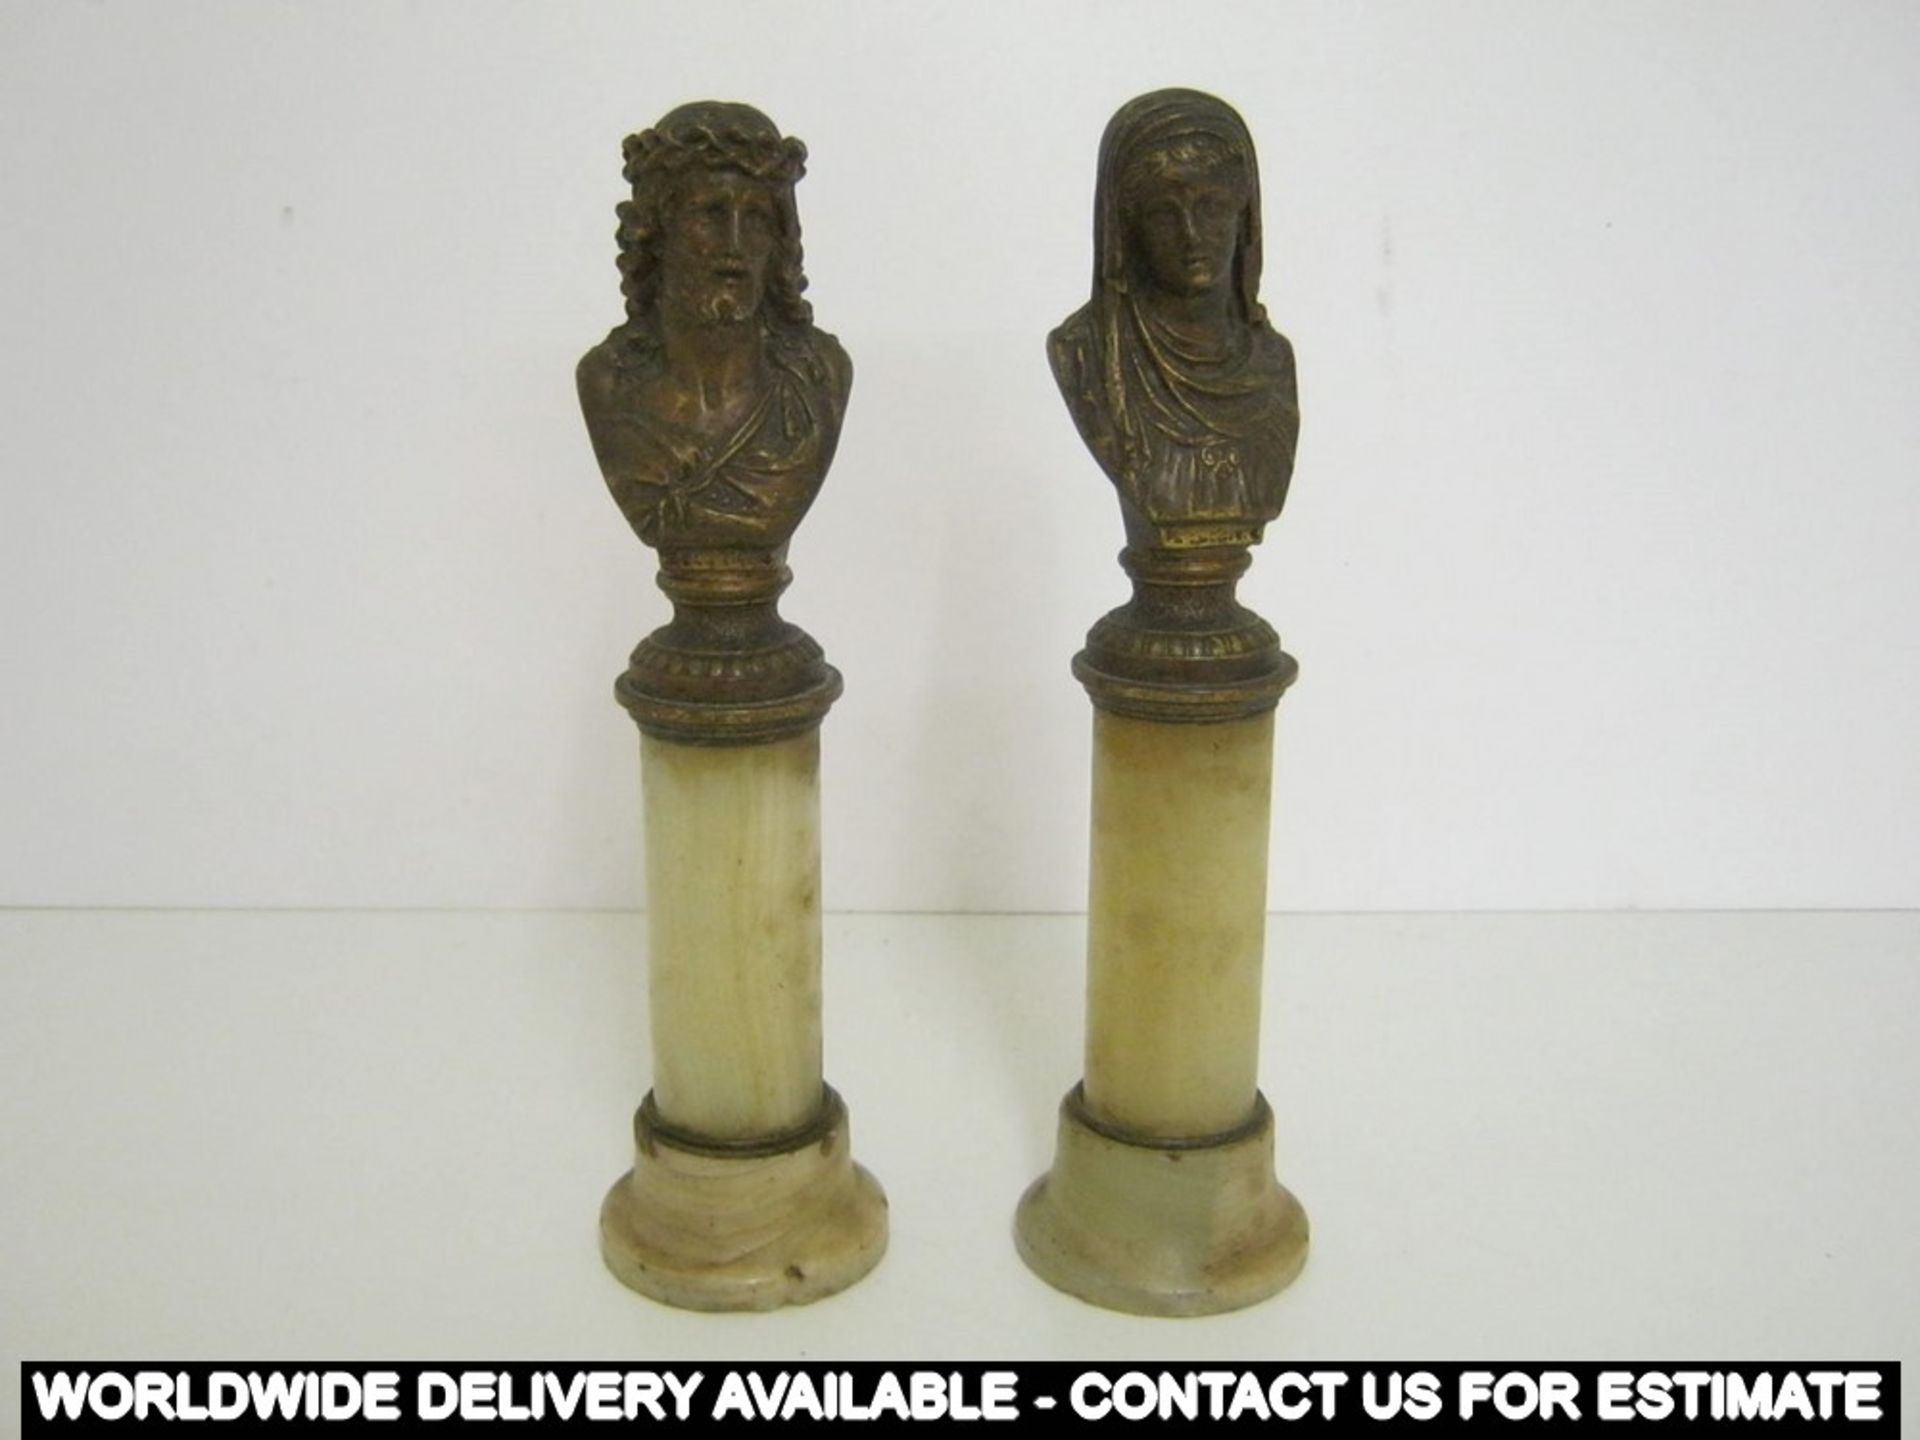 Pair of gilt bronze mounted figures of Jesus Christ and Mary Magdalene